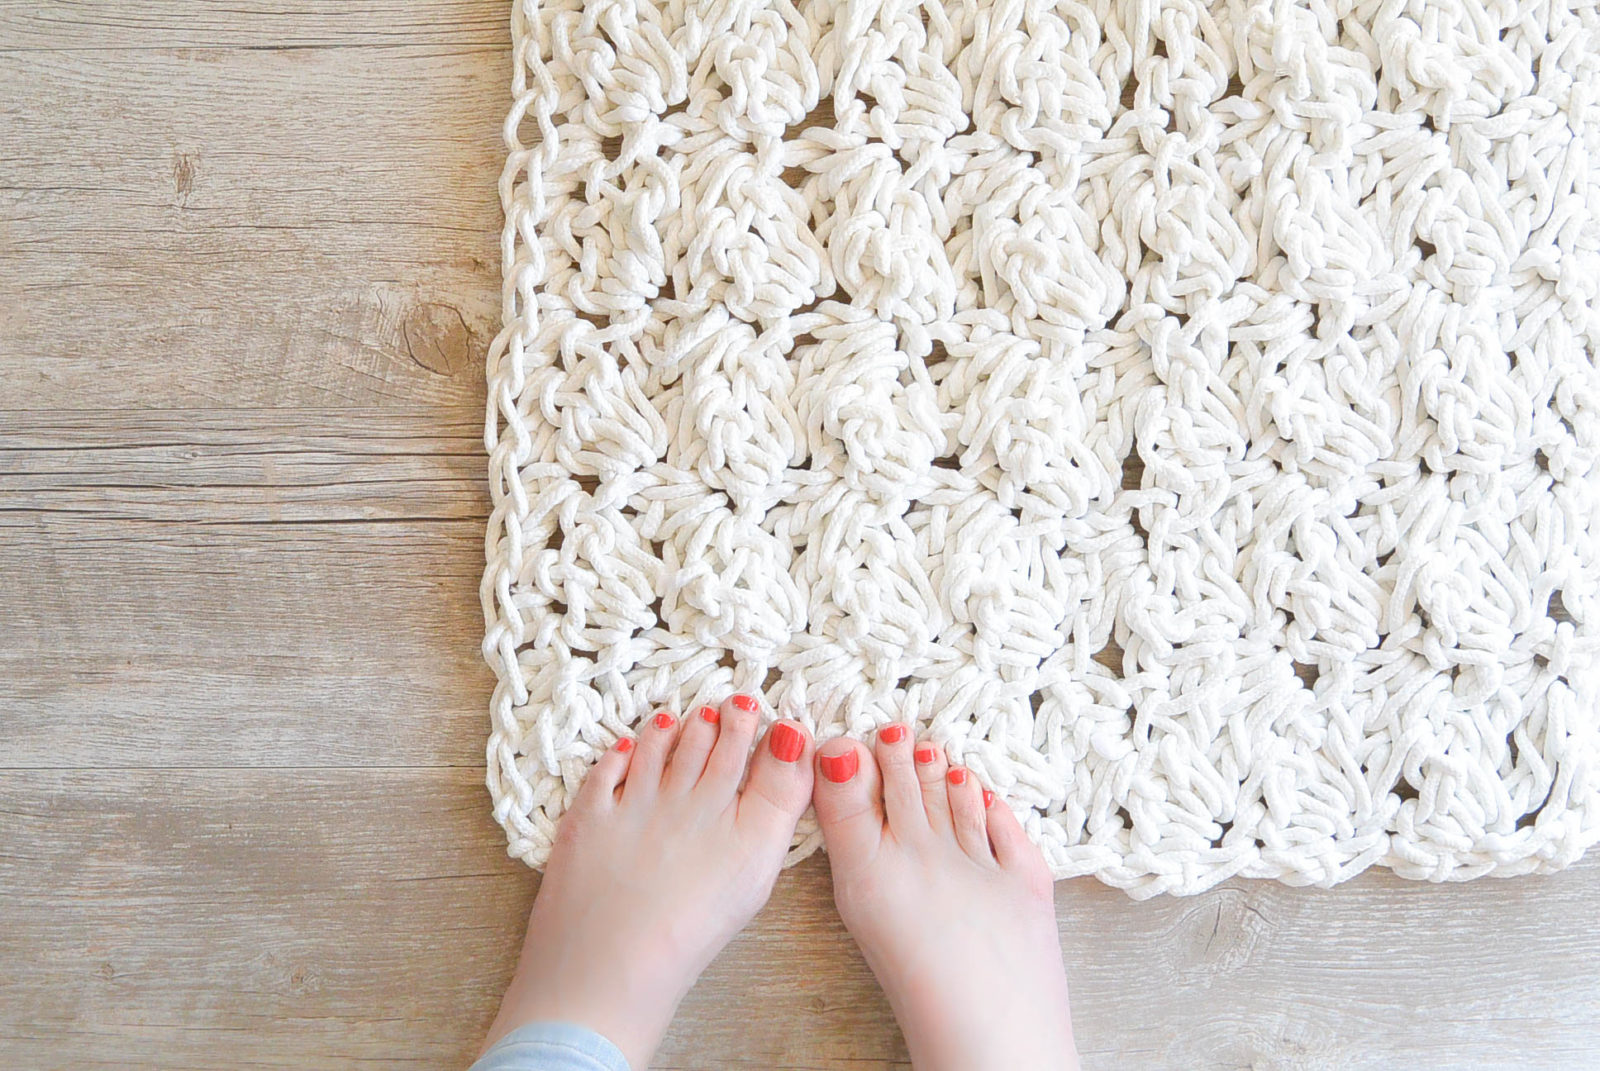 https://www.mamainastitch.com/wp-content/uploads/2016/05/How-to-Crochet-A-Rug-with-Rope.jpg